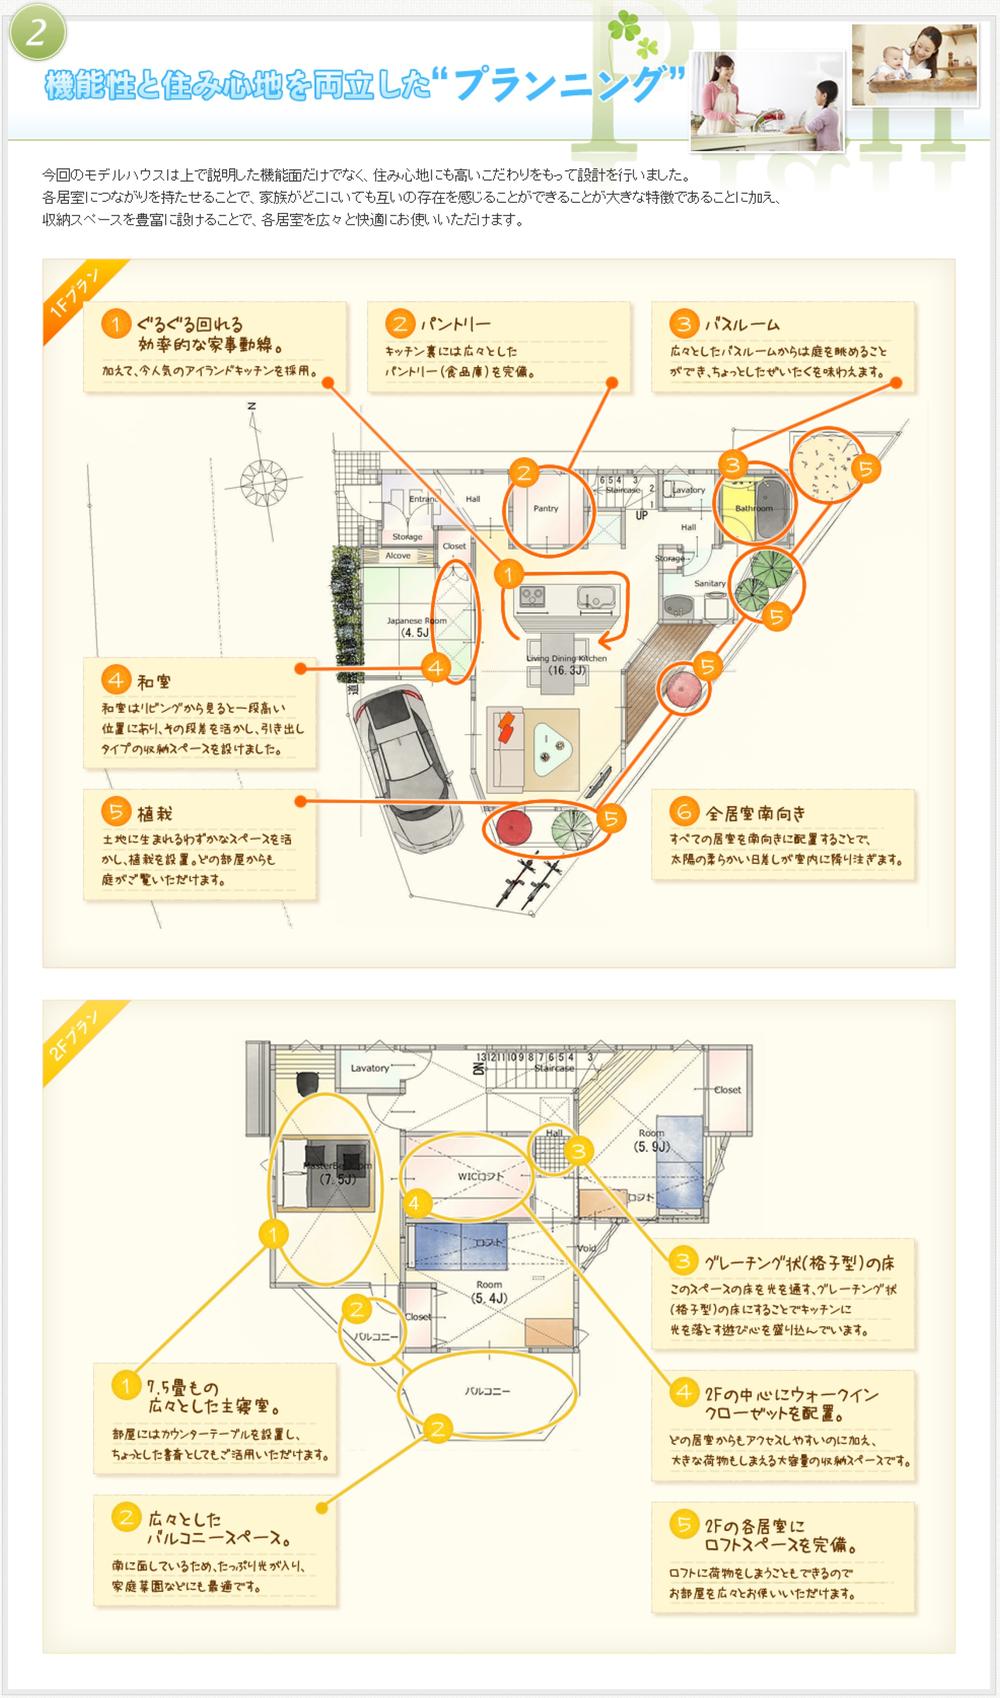 Floor plan. 52,800,000 yen, 4LDK, Land area 97.7 sq m , Leisurely spend a building area of ​​104.47 sq m family, Planning can feel the presence of the family while wherever you are (4LDK)